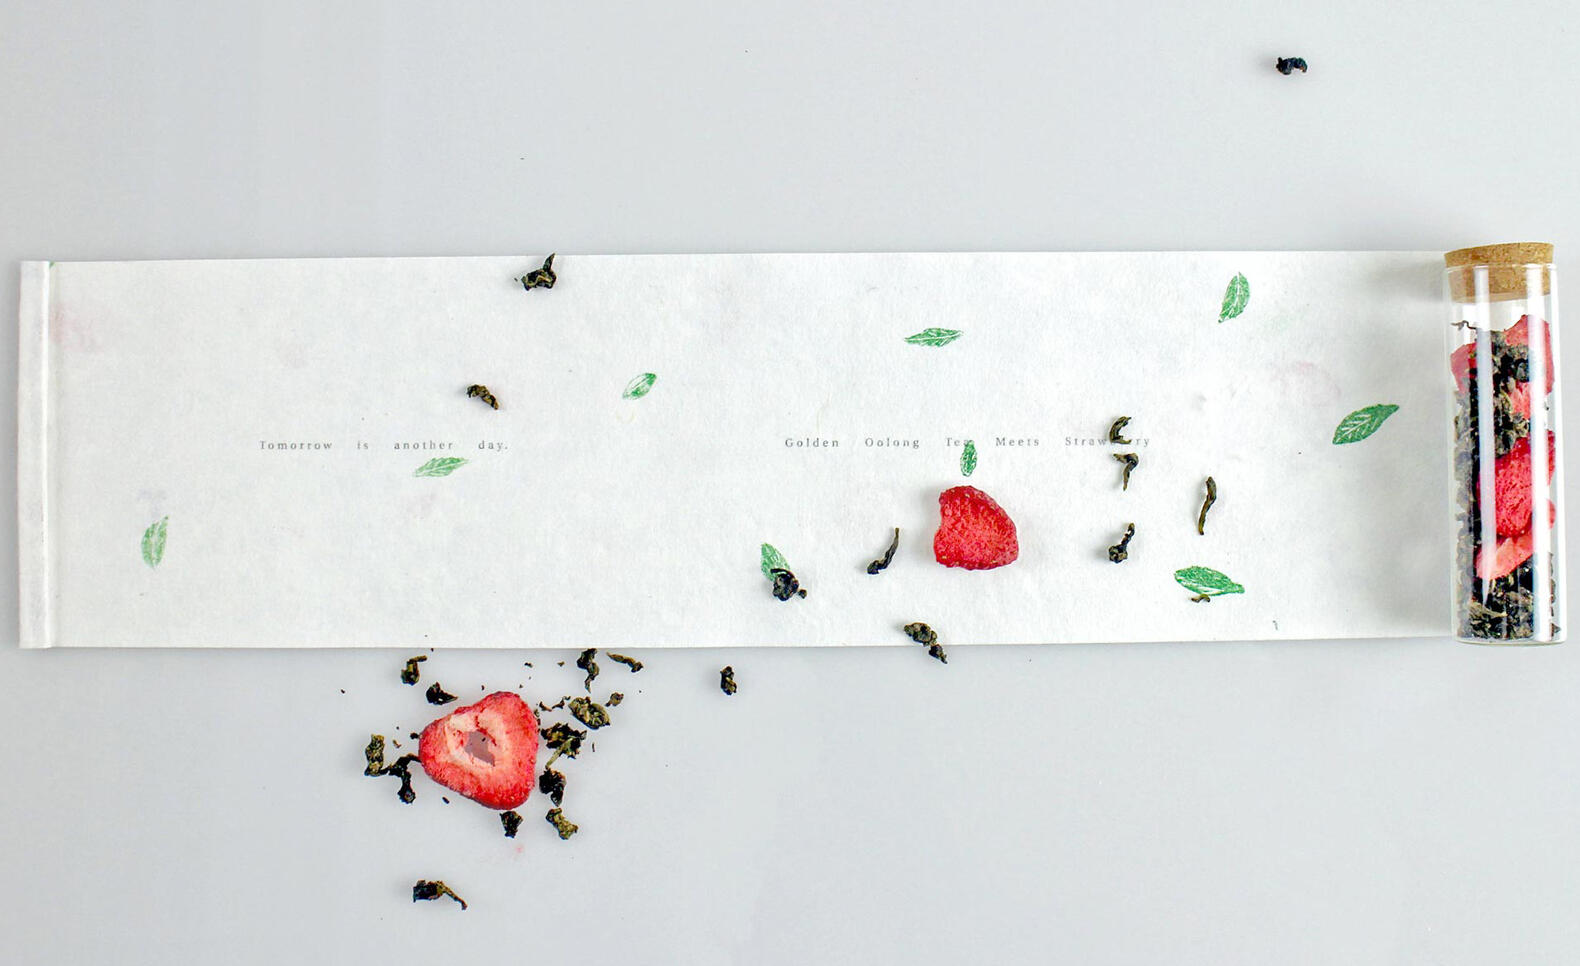 Photograph of a scroll, tea leaf, and strawberry ; Xingzi Liang